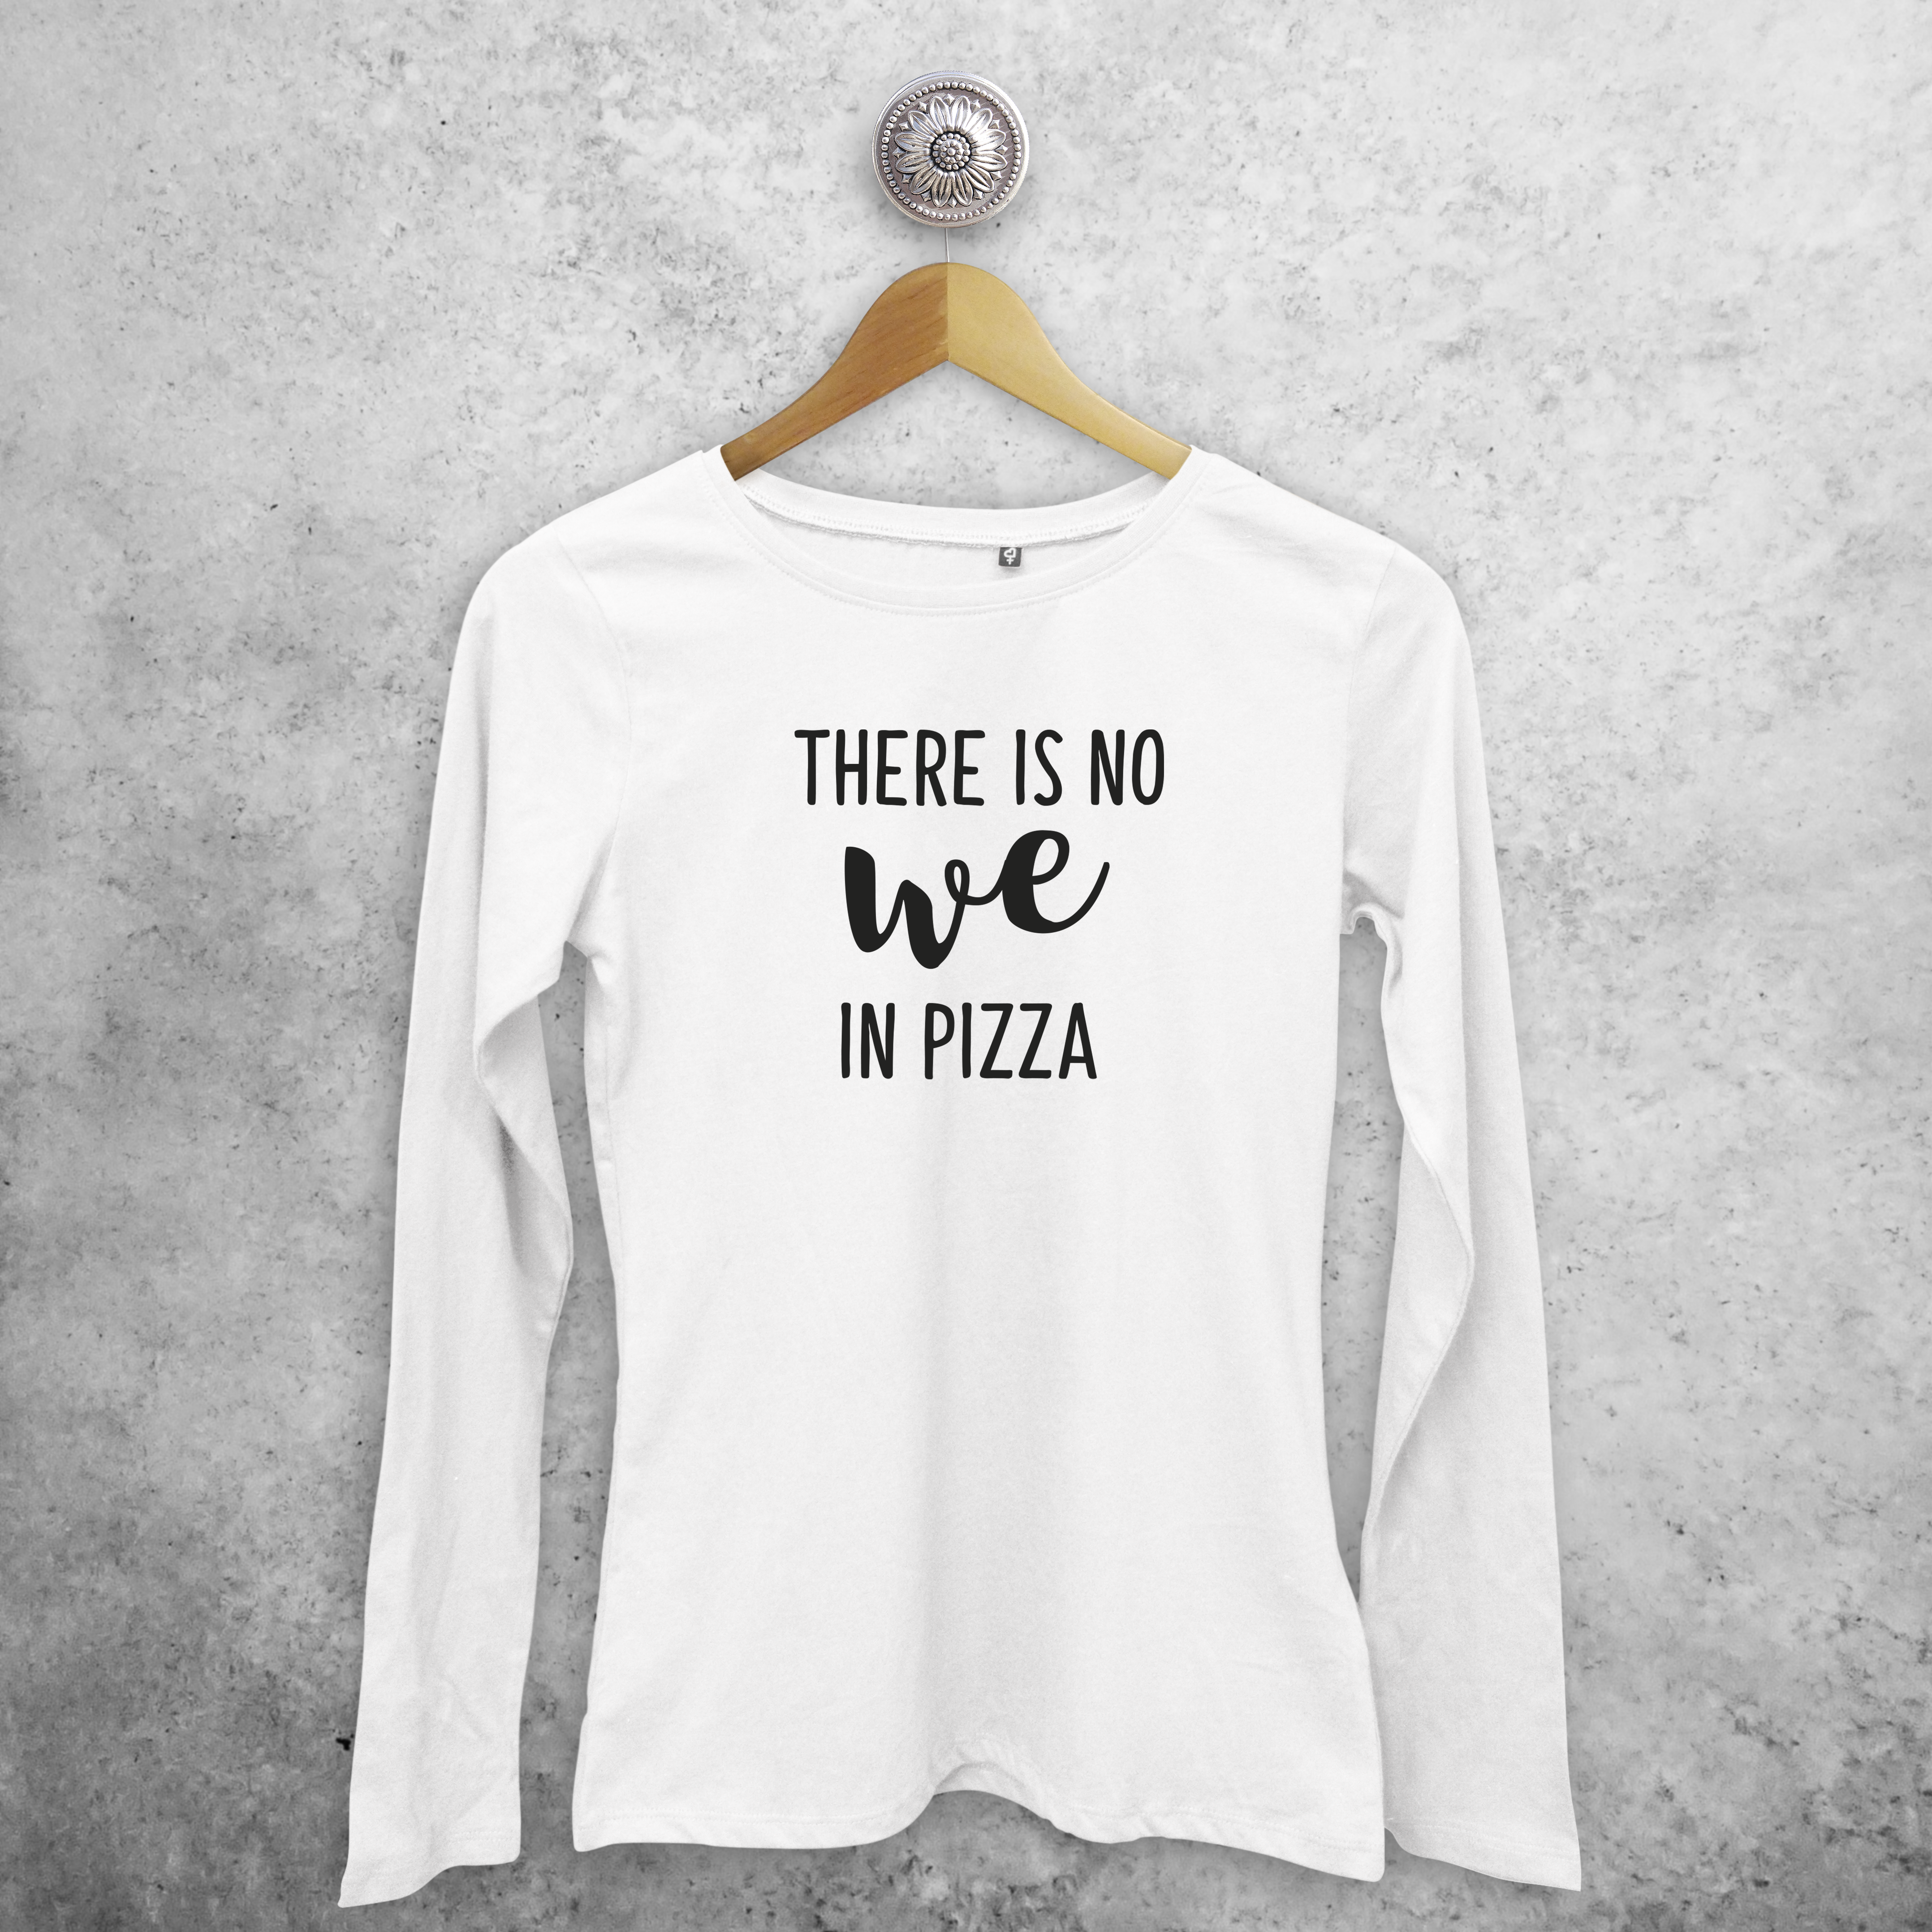 'There is no we in pizza' adult longsleeve shirt